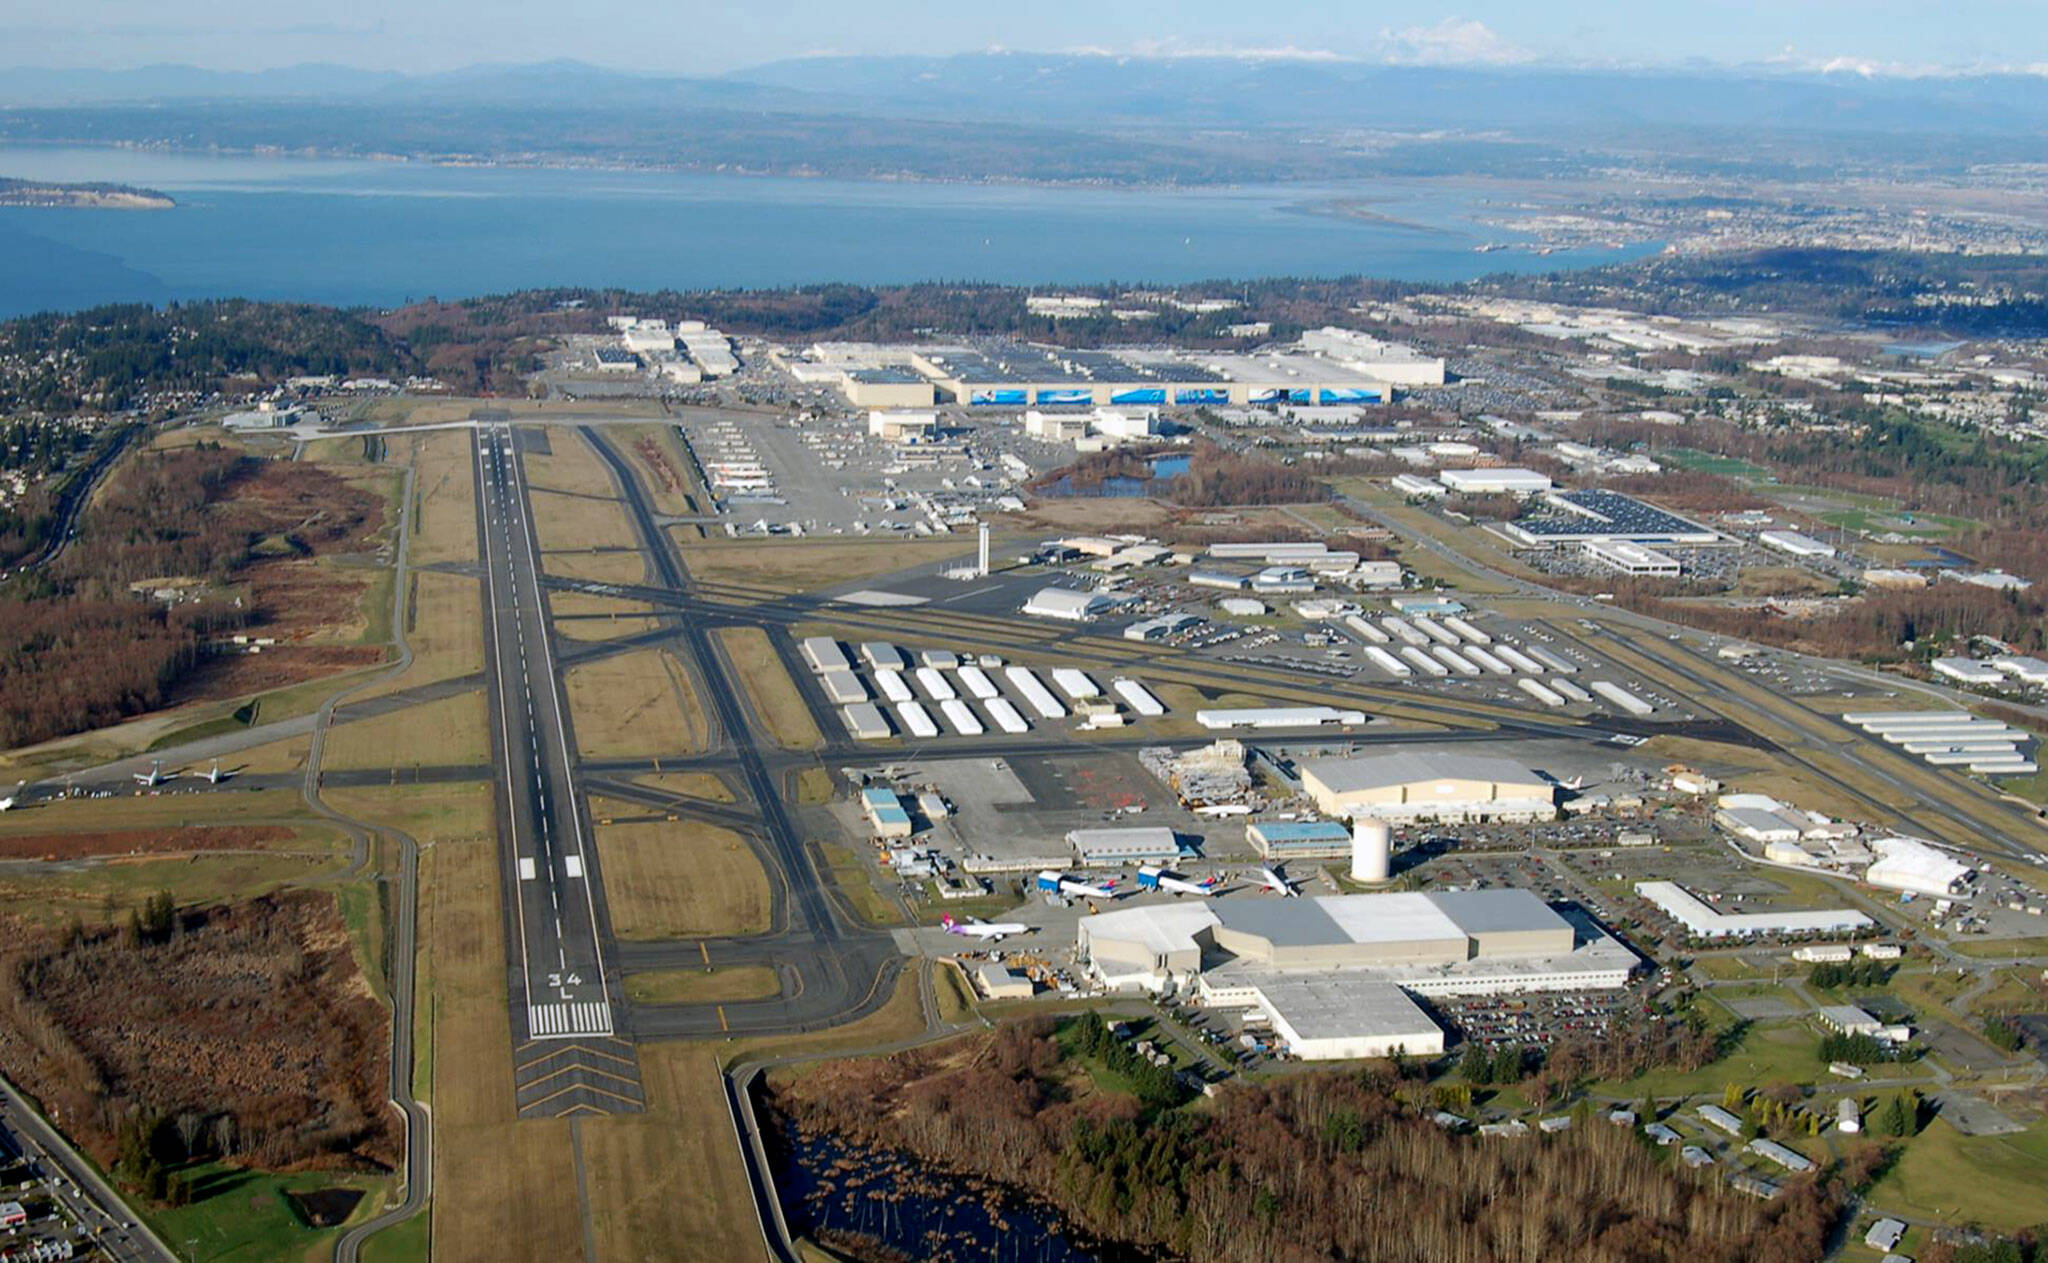 Looking north, an aerial view of Paine Field in Everett. (Paine Field / Snohomish County)